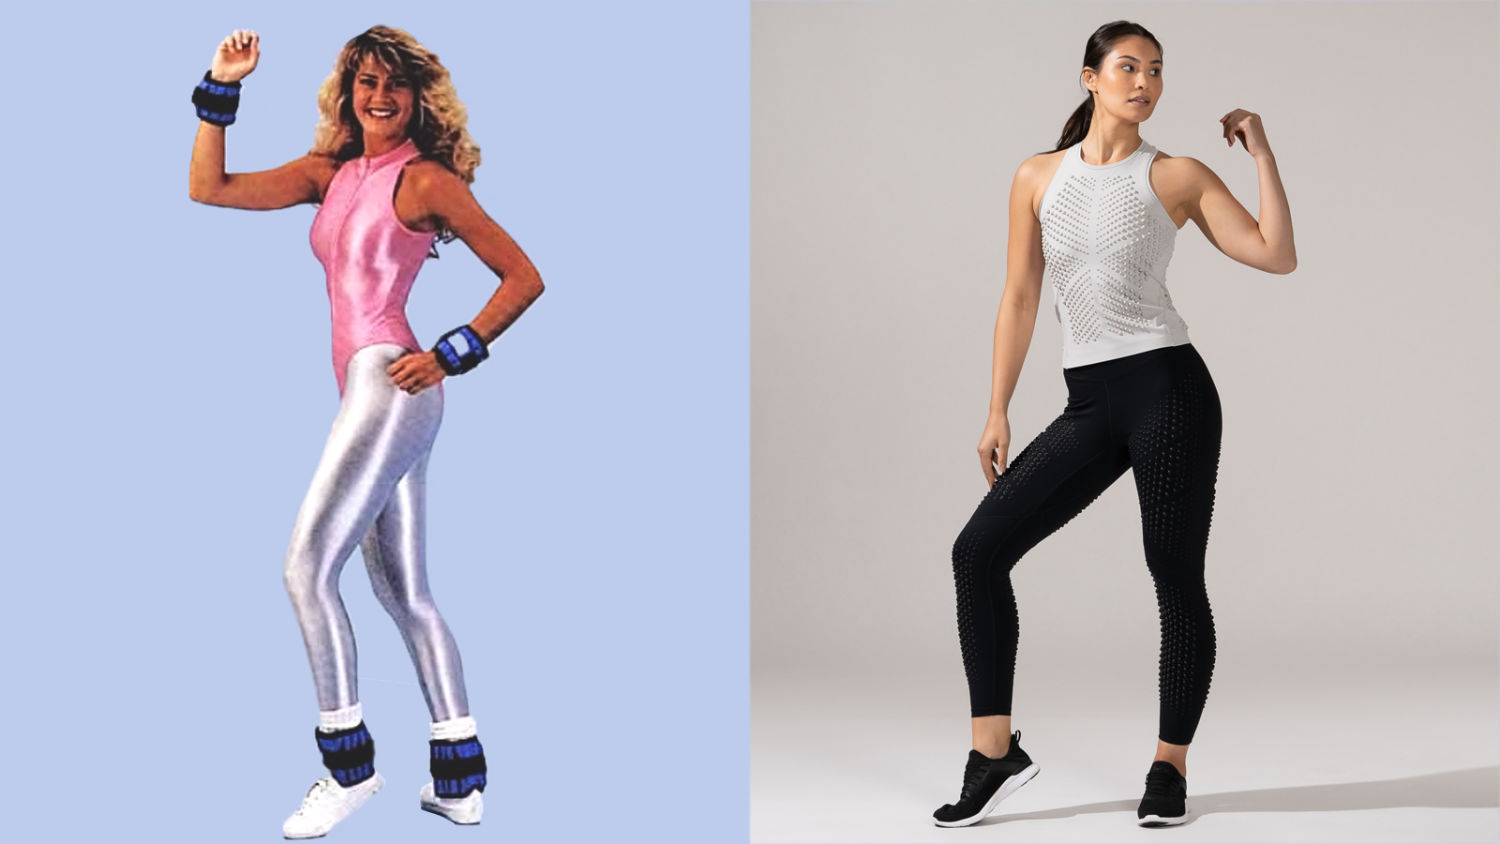 Image contrasting workout trends from the 1980's ankle weights to 2023 workout clothing with distributed microload weights.